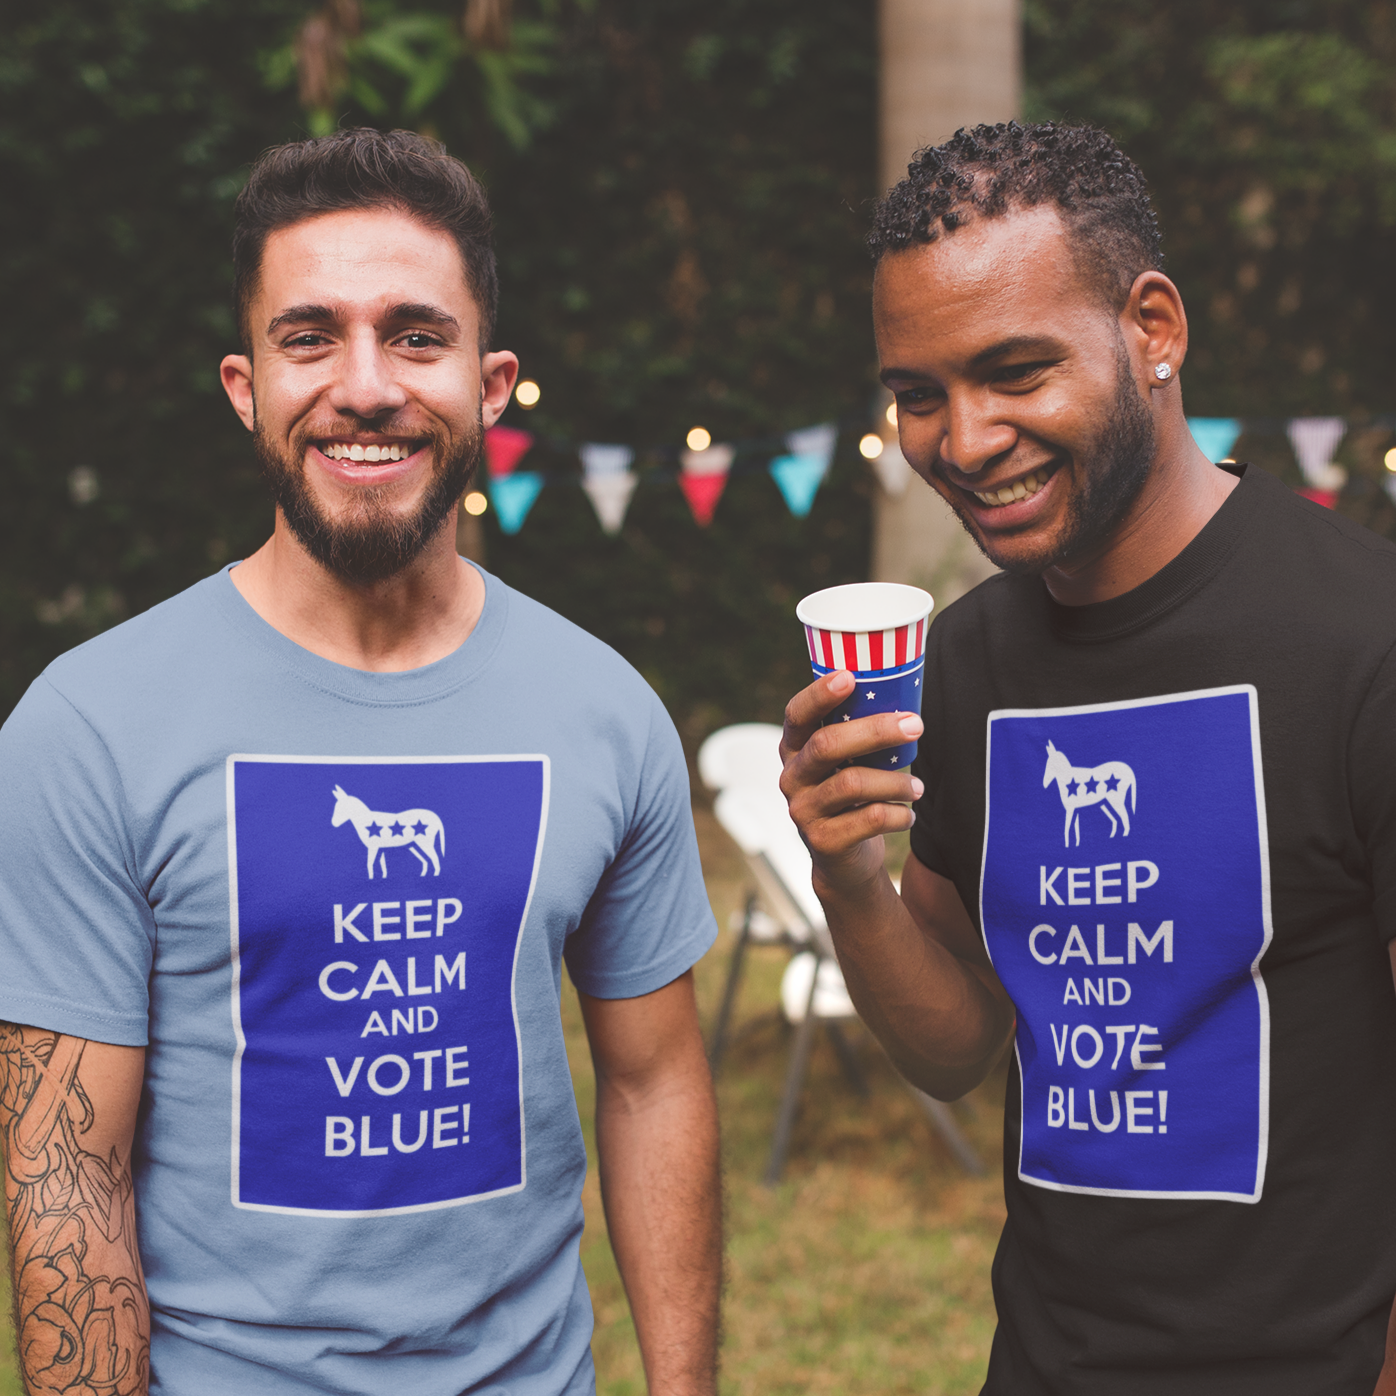 KEEP CALM AND VOTE BLUE Adult Unisex T-Shirt